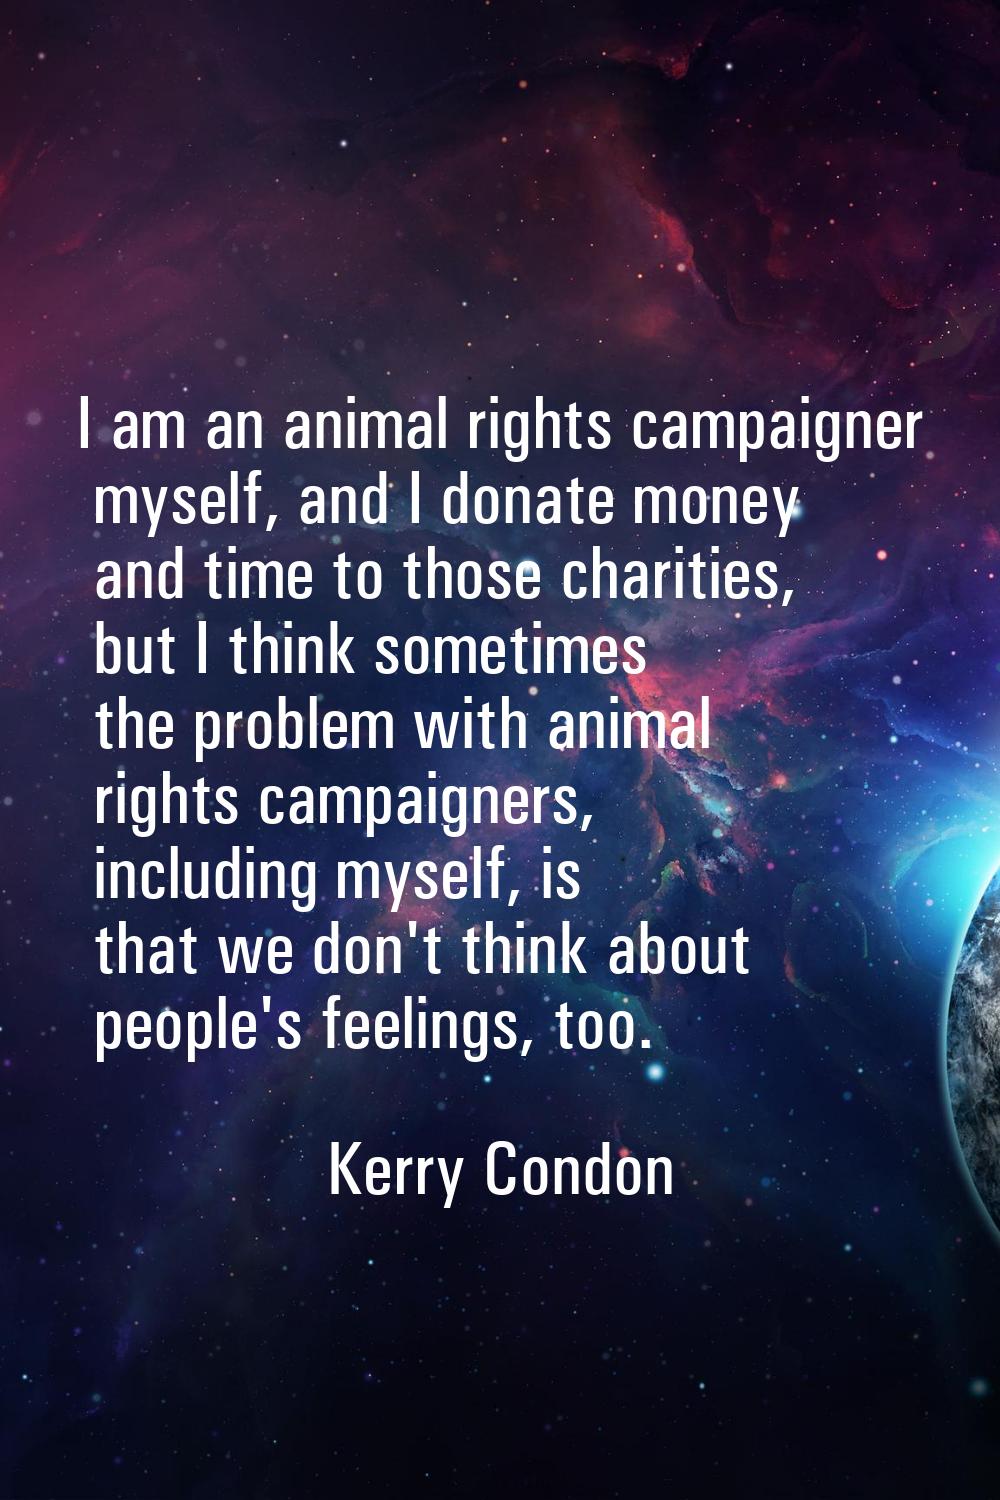 I am an animal rights campaigner myself, and I donate money and time to those charities, but I thin